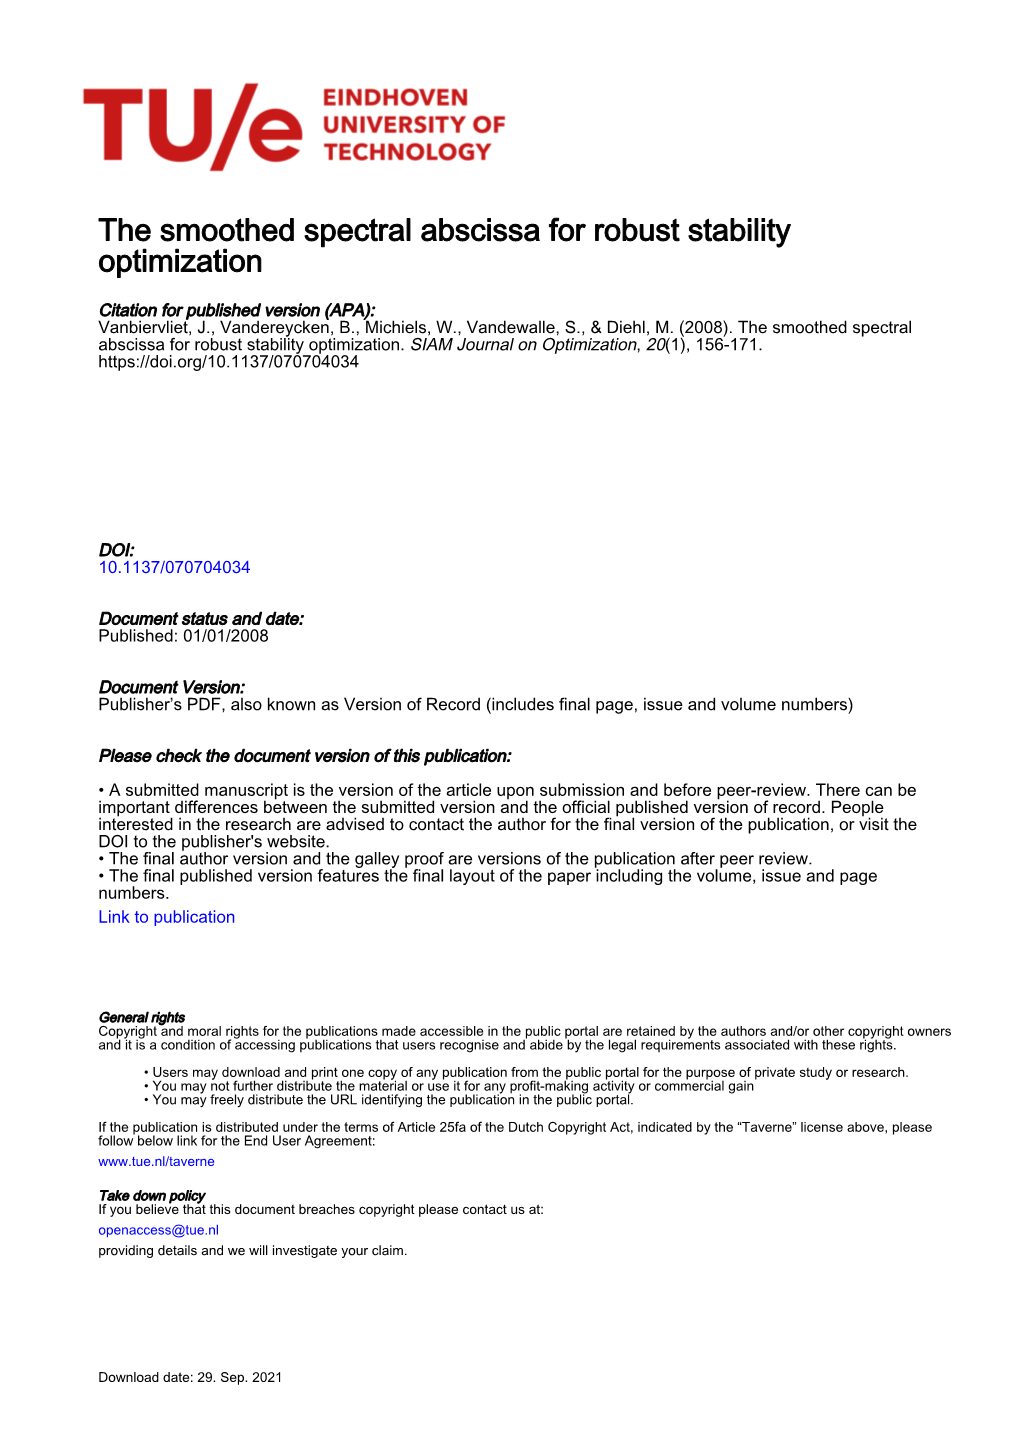 The Smoothed Spectral Abscissa for Robust Stability Optimization